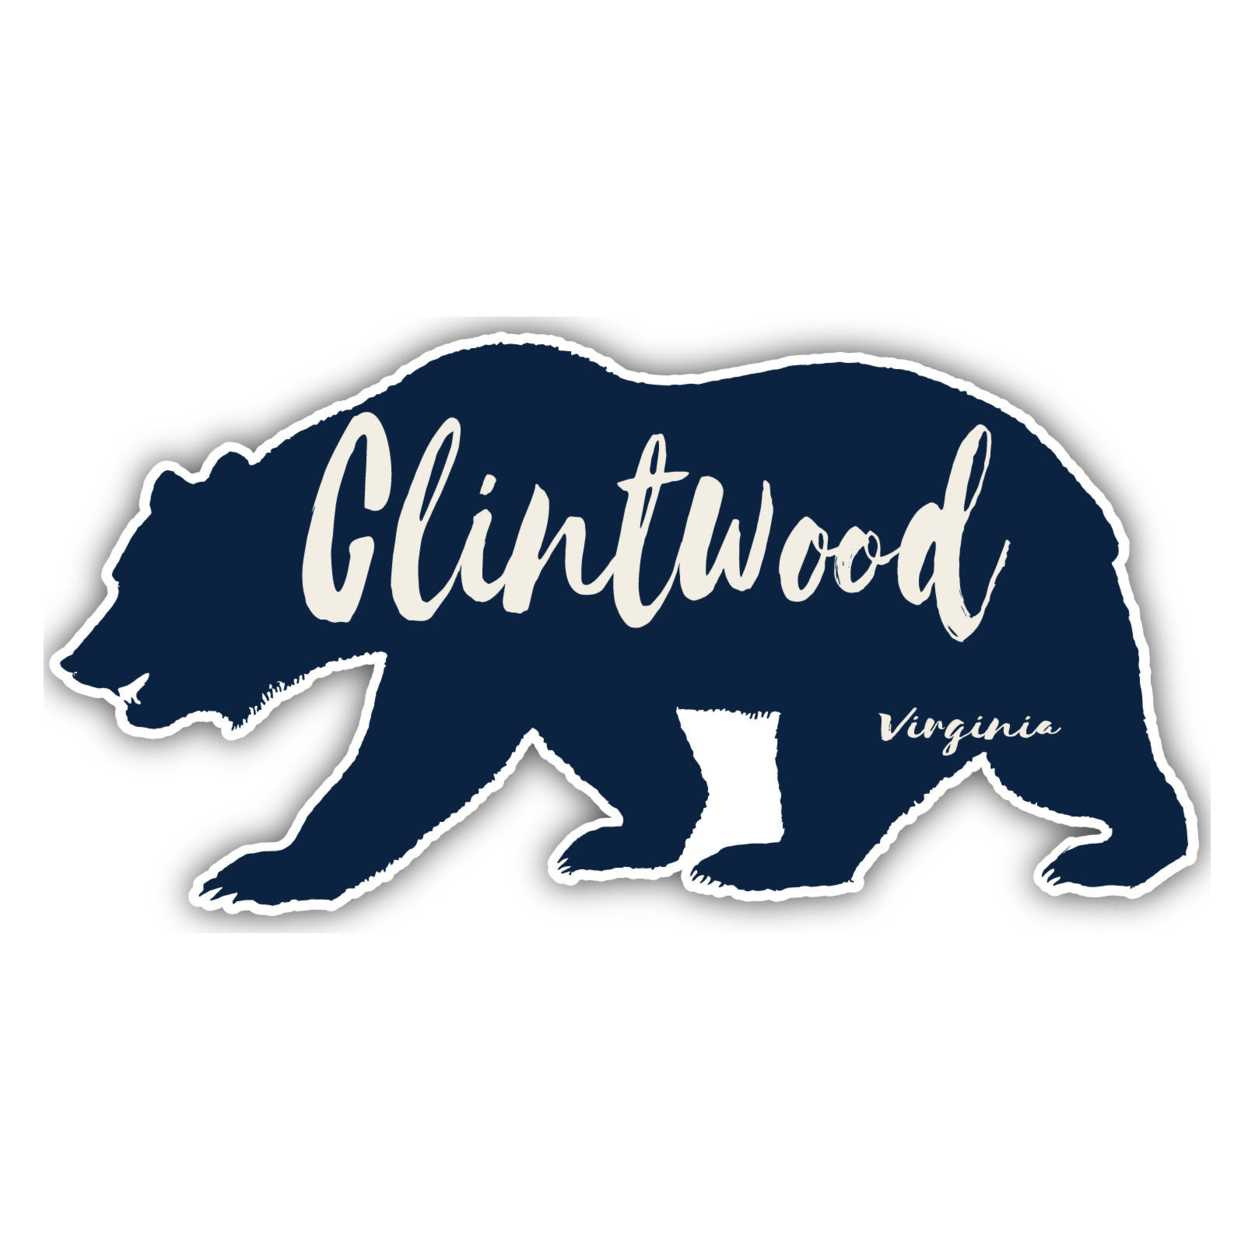 Clintwood Virginia Souvenir Decorative Stickers (Choose Theme And Size) - 4-Pack, 8-Inch, Bear